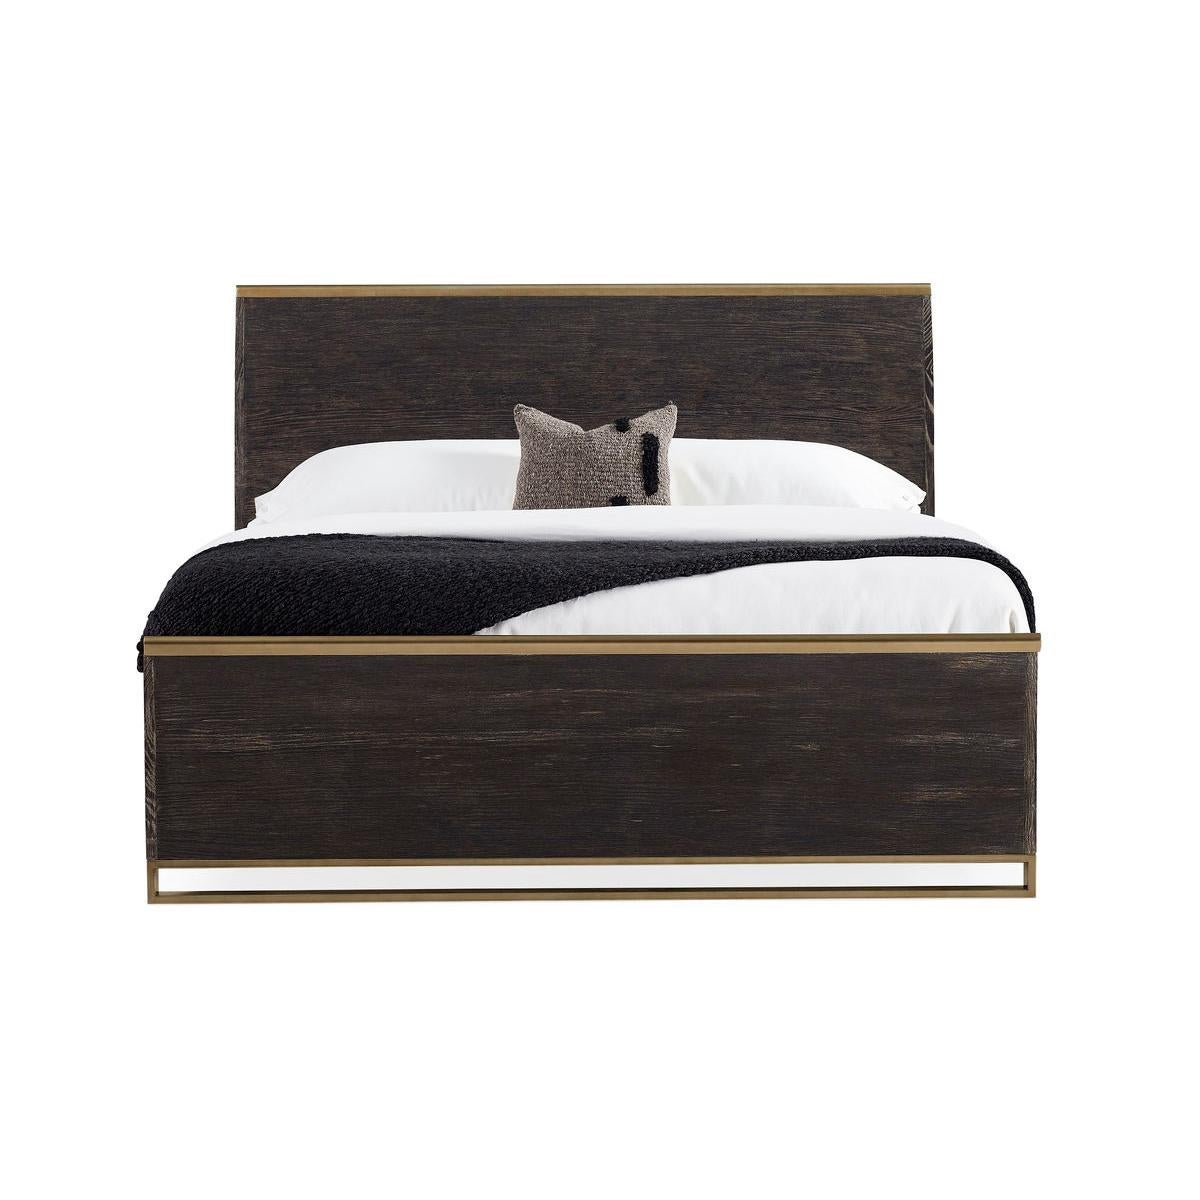 A modern Queen bed with a metal rail in bronze metallic paint outlining the top of both the headboard and footboard. The headboard and footboard have a slightly curved profile. 
Dimensions: 64